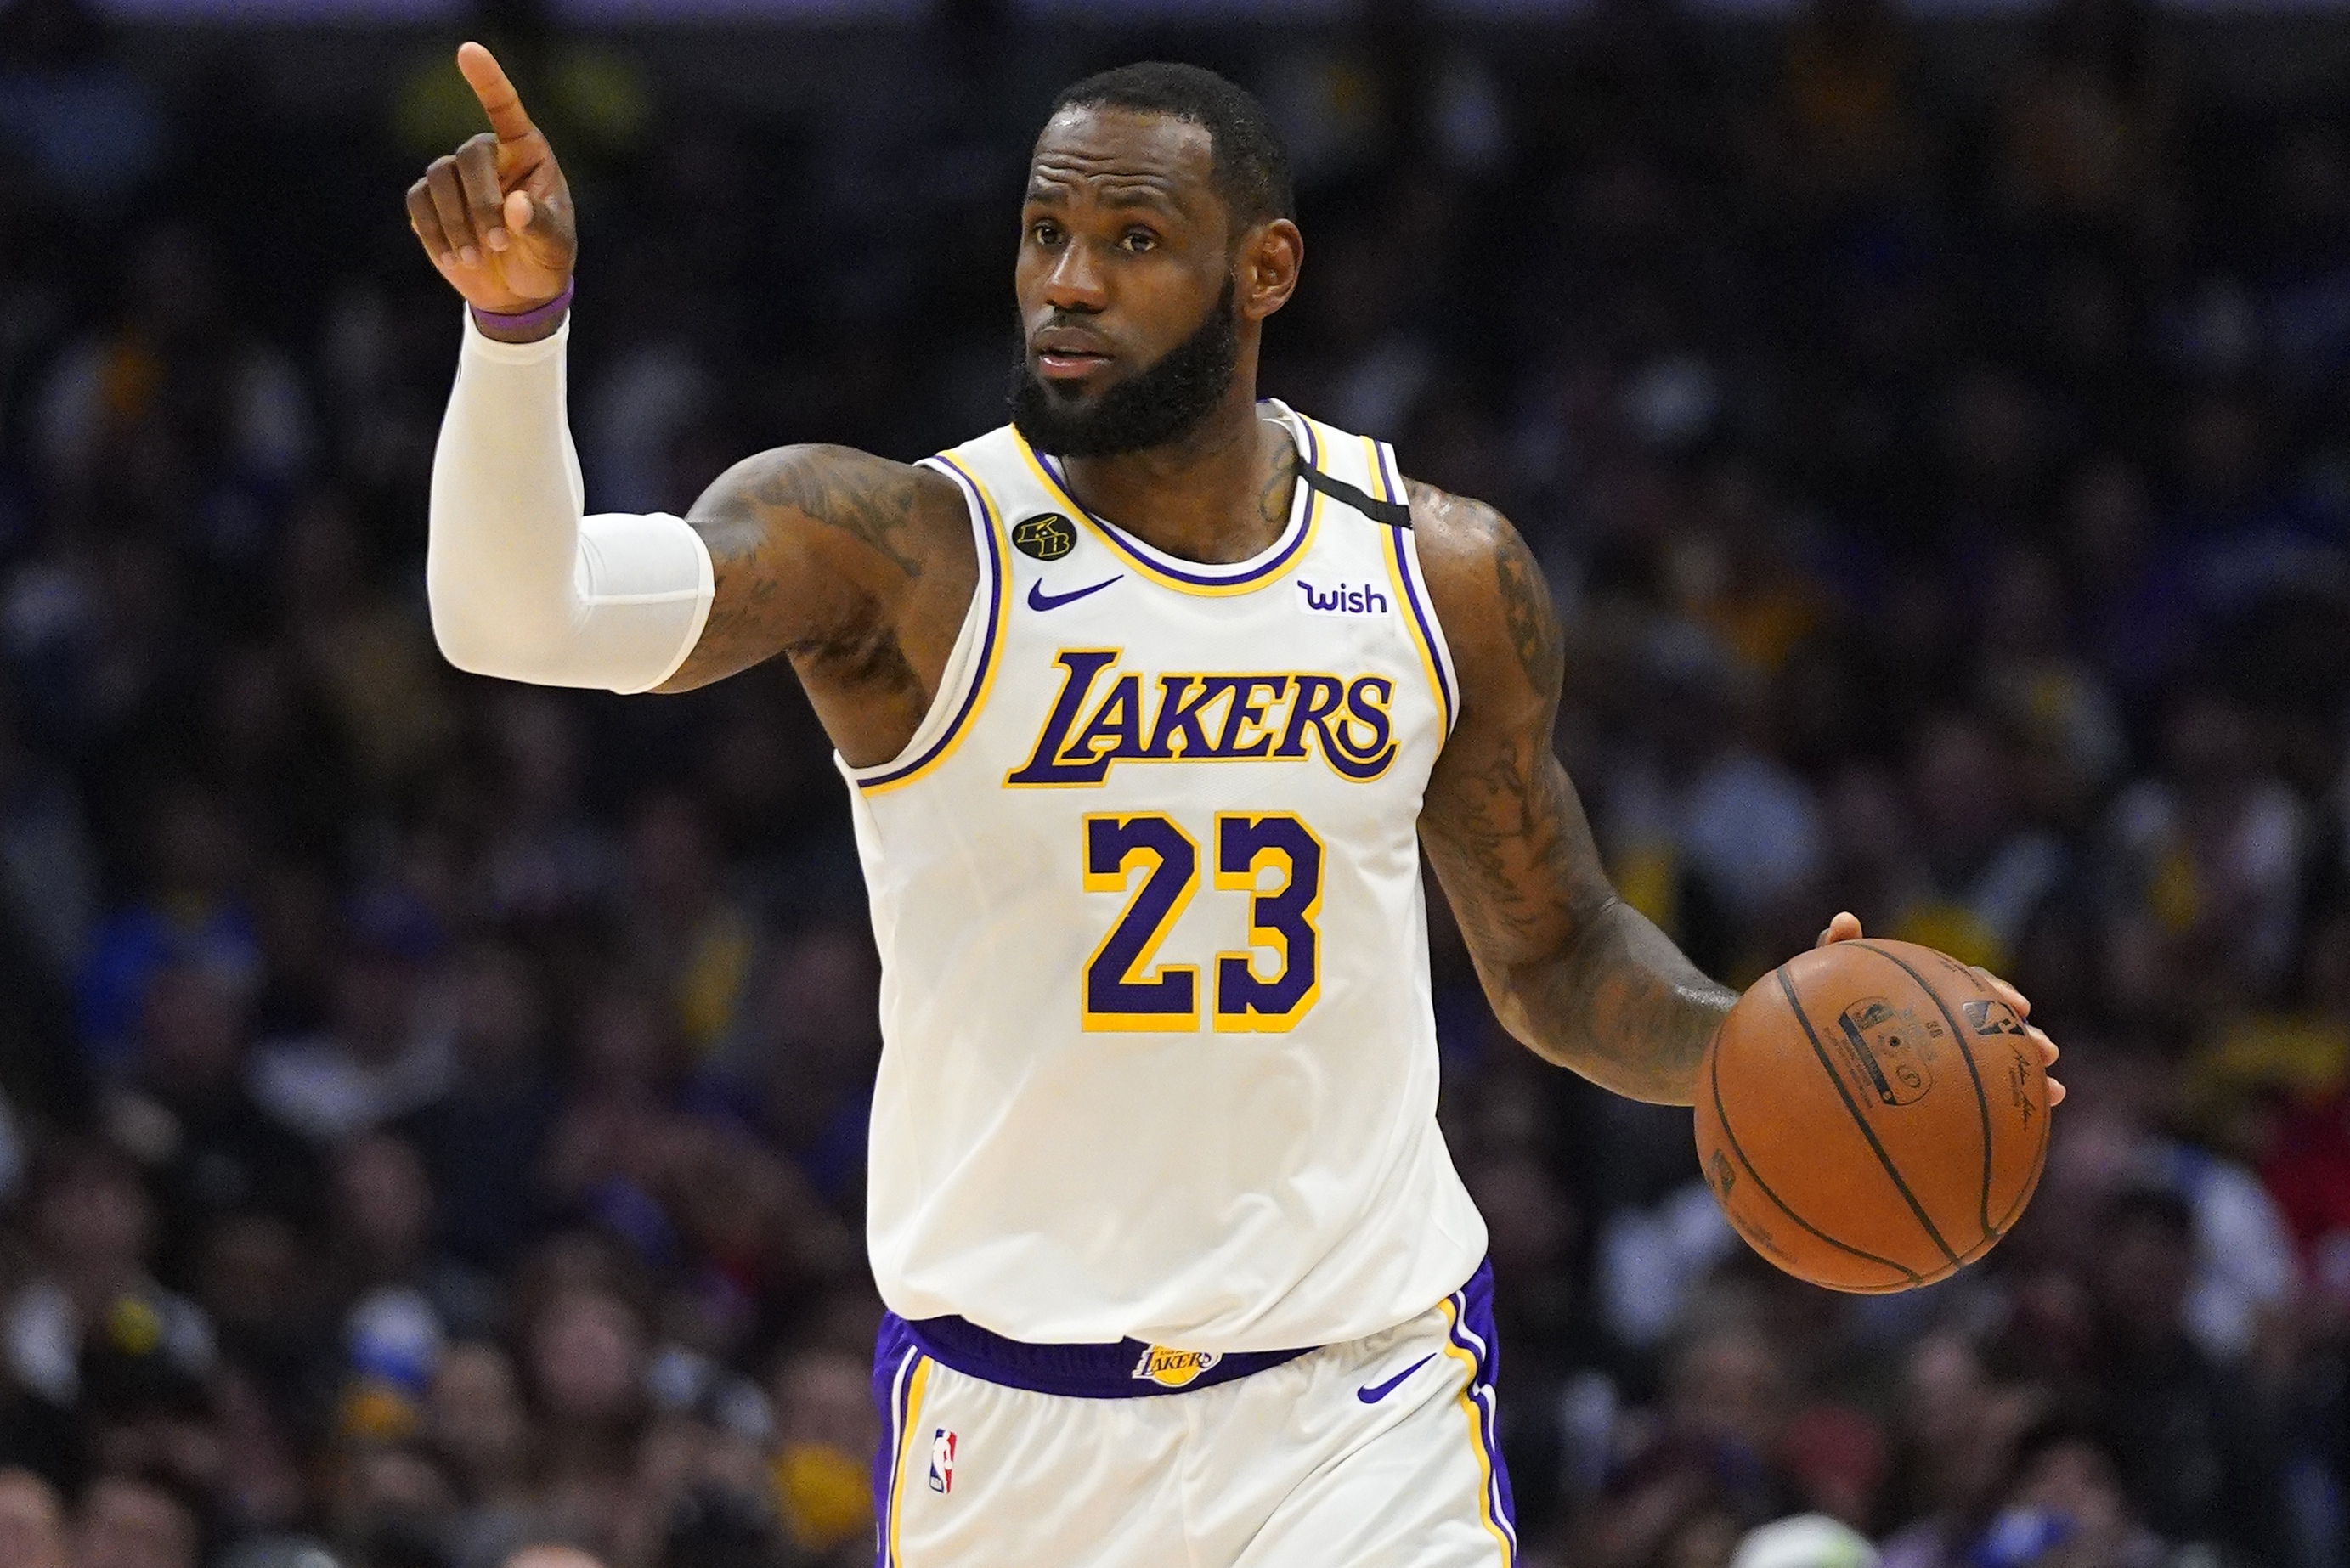 Lakers' LeBron James Will Wear Last Name on Jersey, Not Social